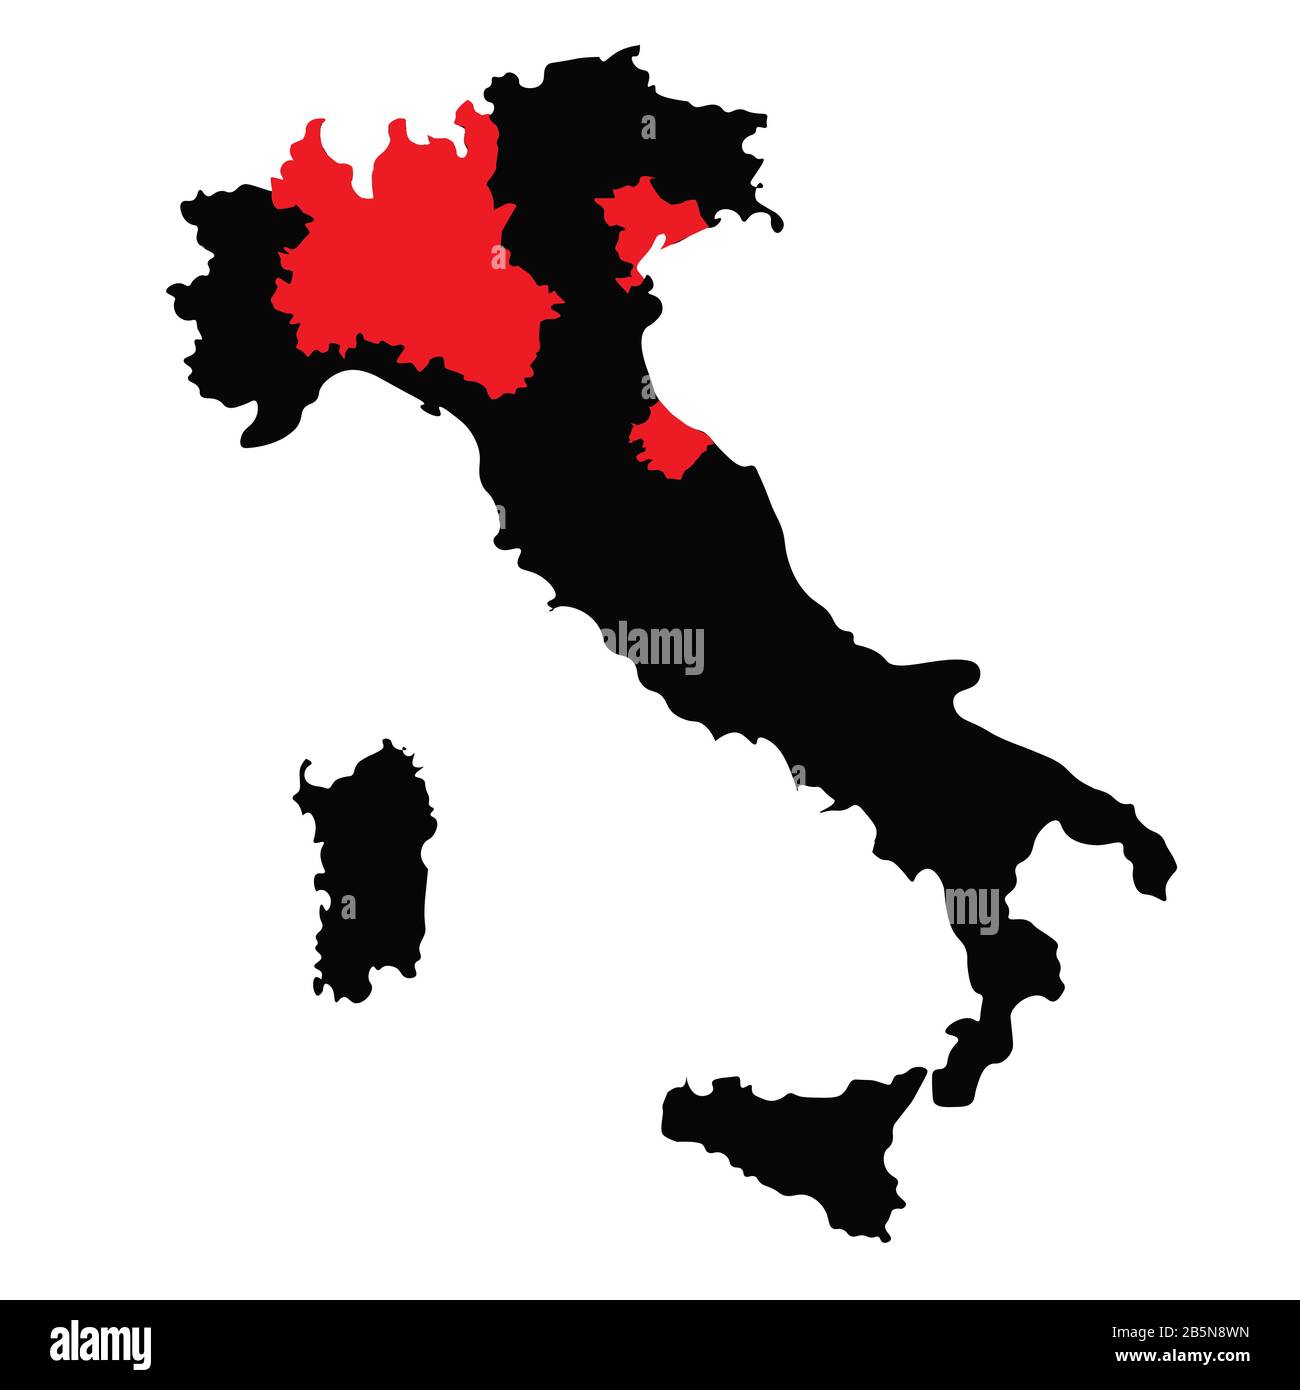 Italy map with regions lockdown due to Coronavirus quarantine as of March 8 2020. Black silhouette of Italy map. Raster illustration. Stock Photo